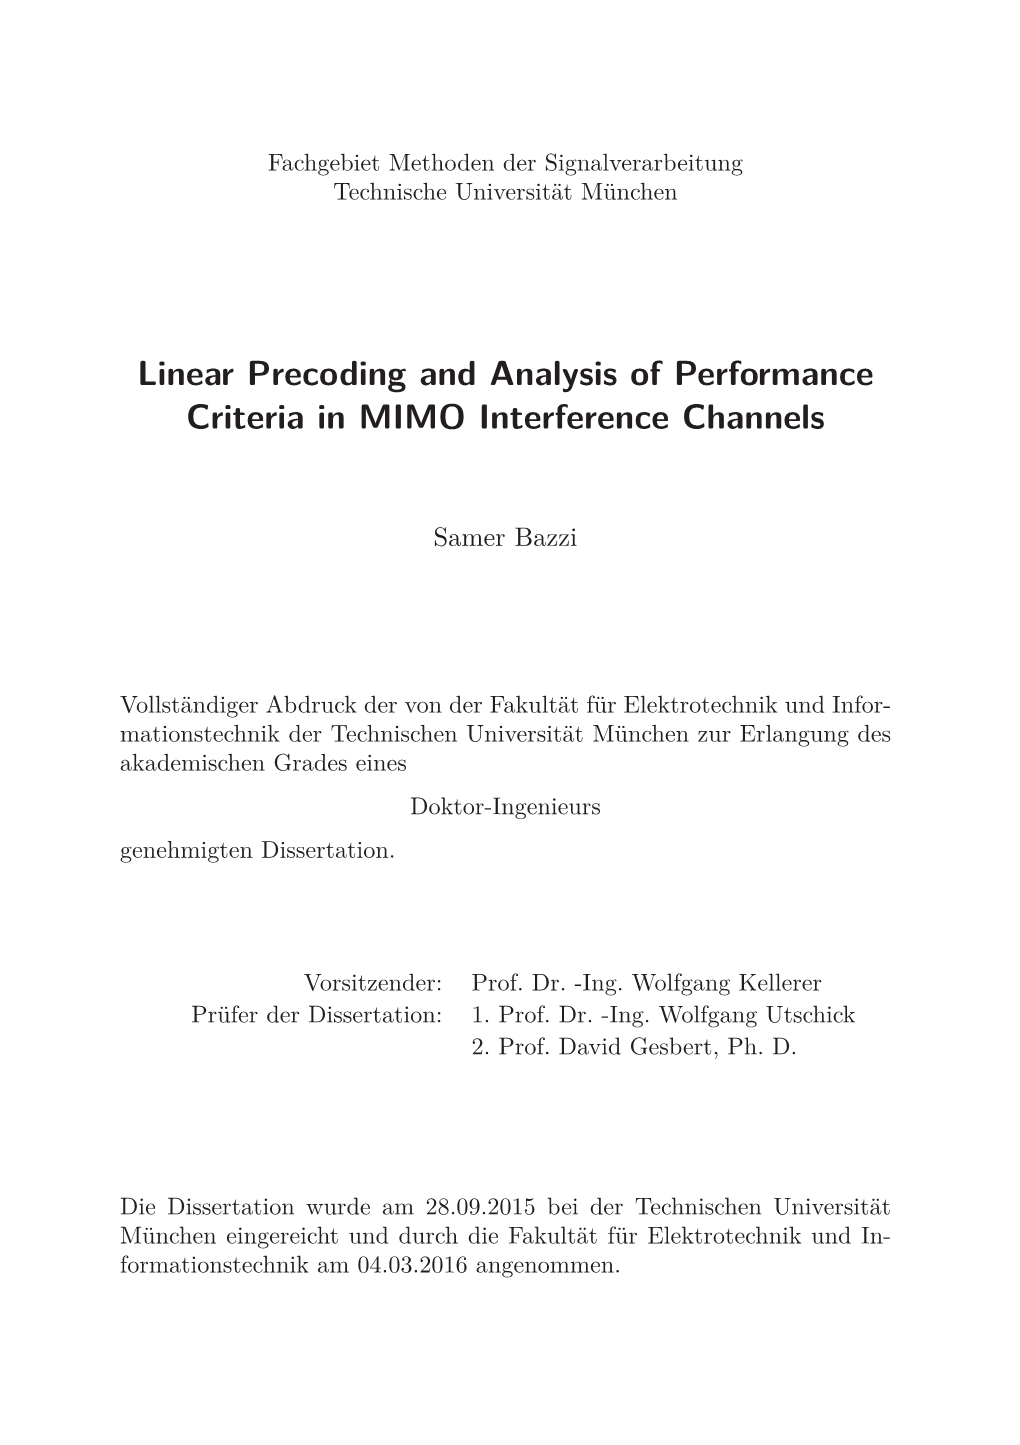 Linear Precoding and Analysis of Performance Criteria in MIMO Interference Channels